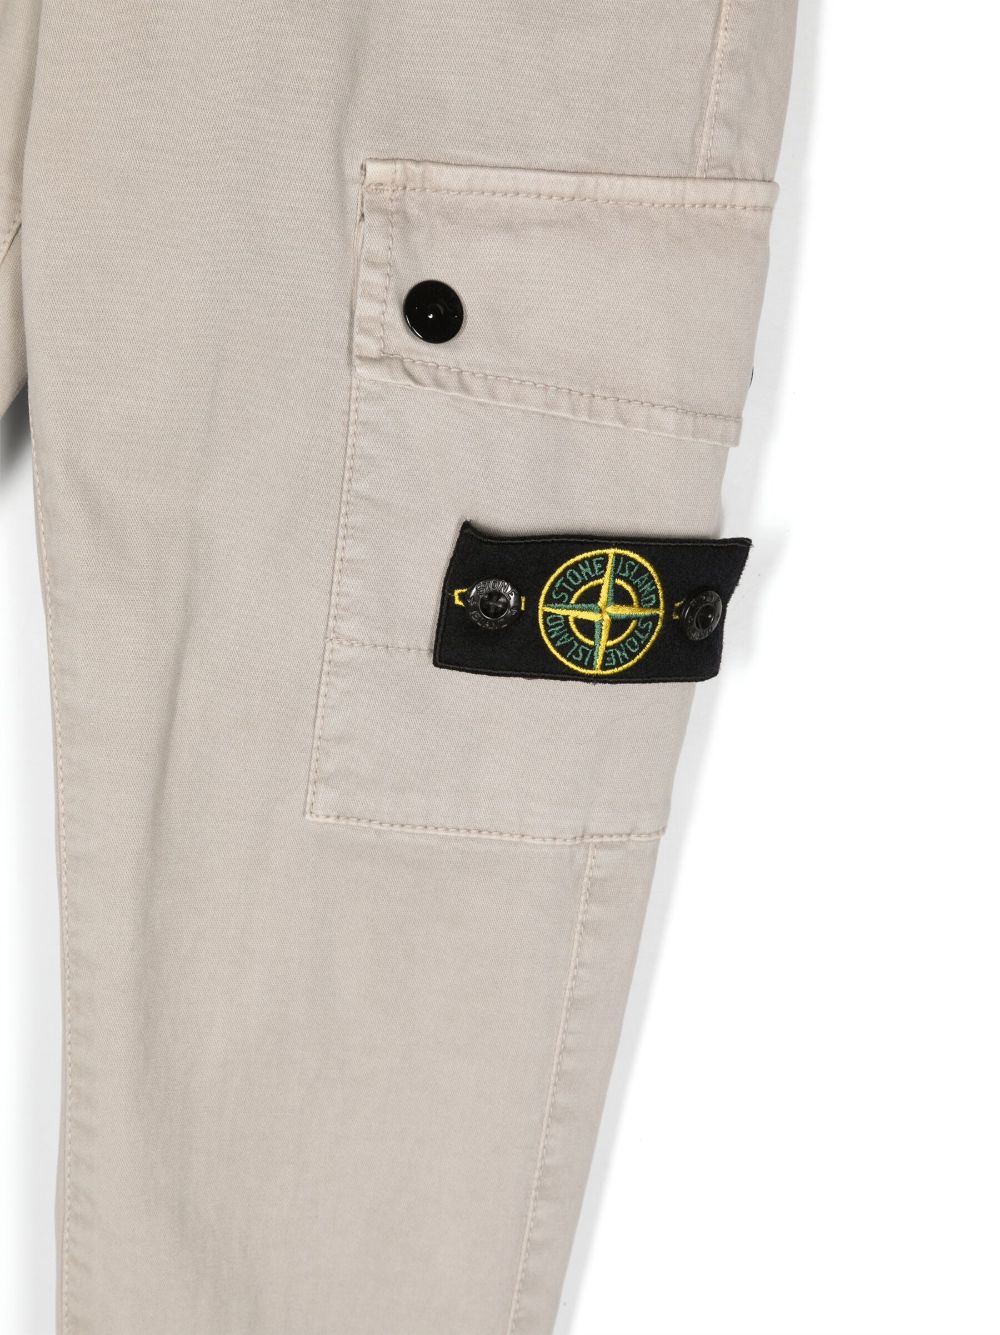 Gray cargo trousers for boys with logo